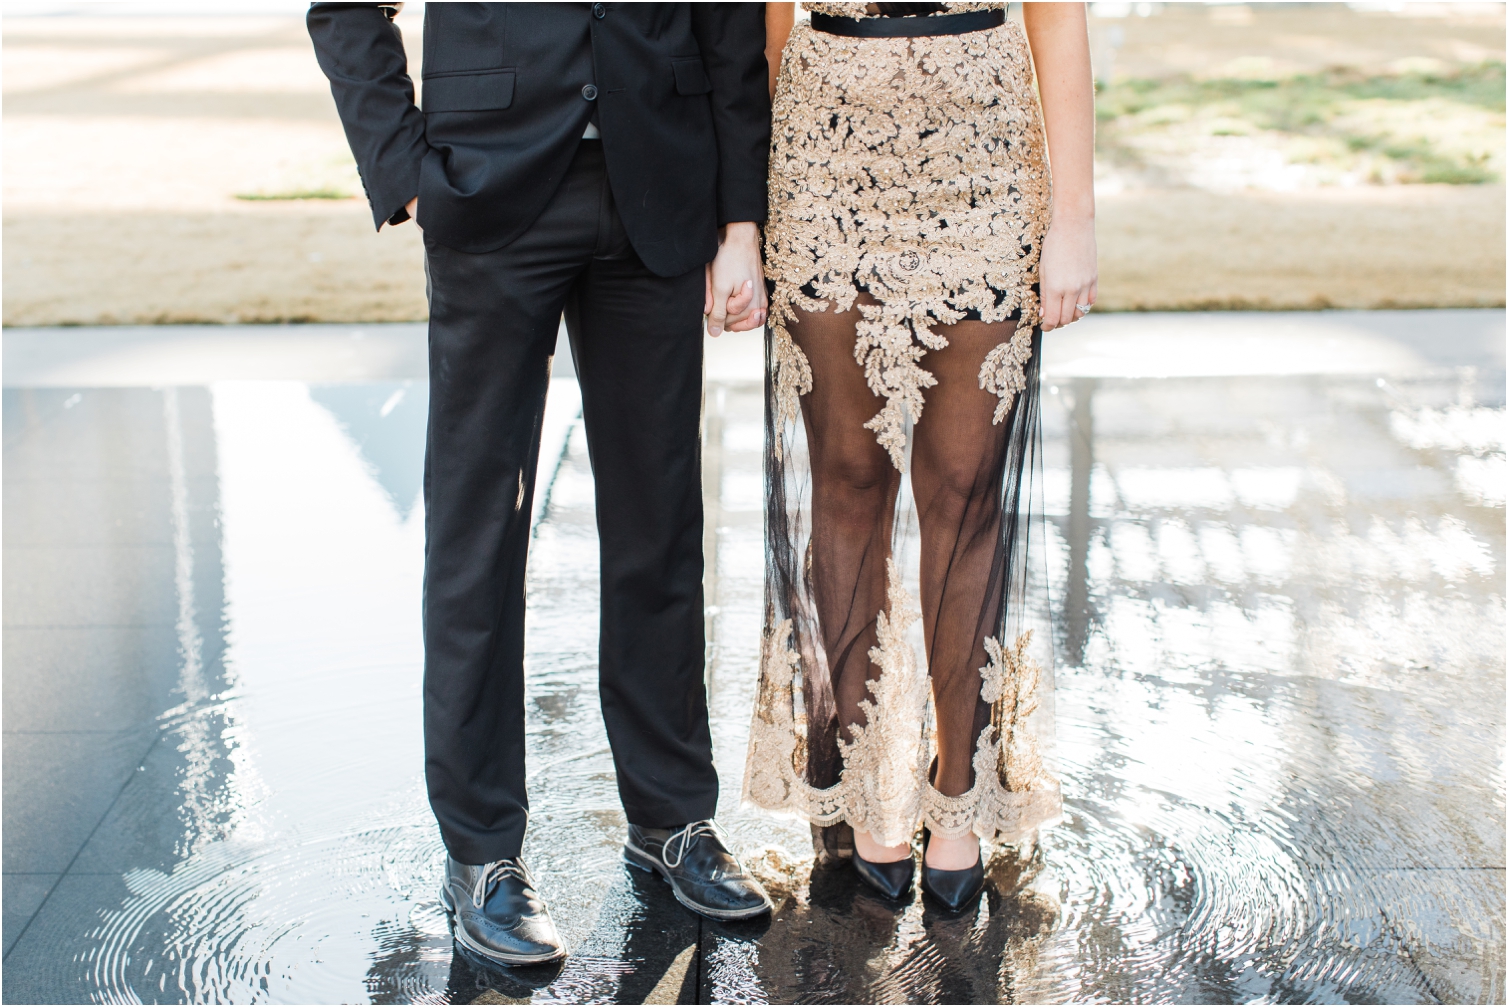 detail shot of black-tie outfits and shoes